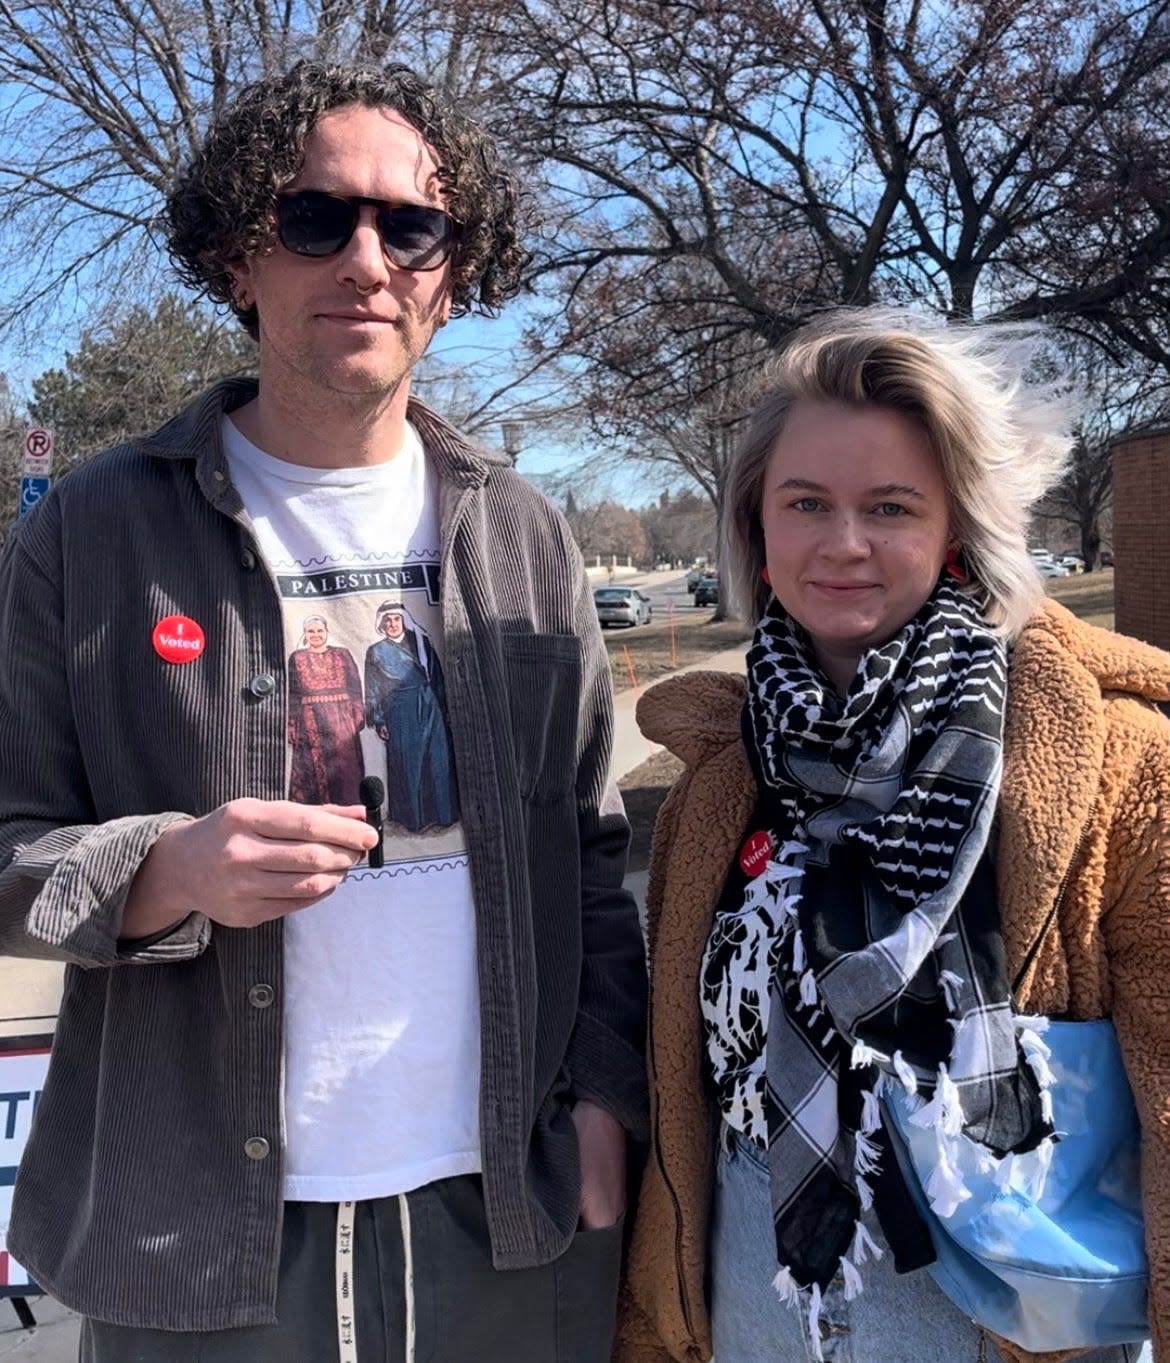 Timothy Frost (left) and Molly Hale (right) of St. Paul, Minne. cast their presidential nominating ballots on March 5, 2024 for 'uncommitted' in protest of President Joe Biden's refusal to call a ceasefire in Gaza.